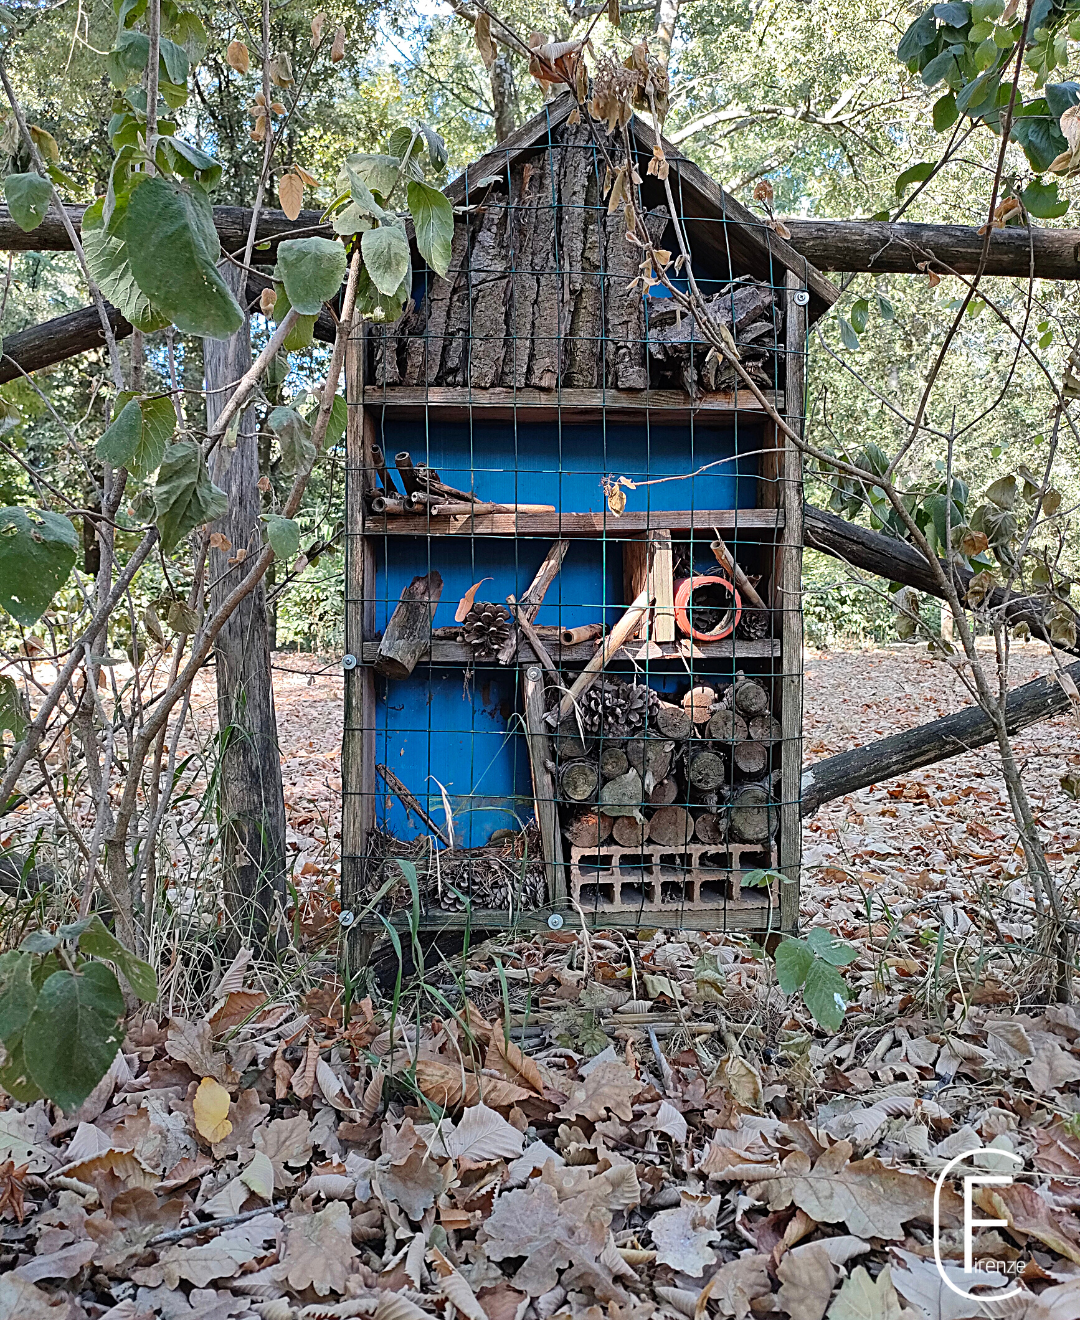 Insect hotels play an important role in biodiversity conservation, both in urban and natural environments, providing a suitable habitat for various insect species.